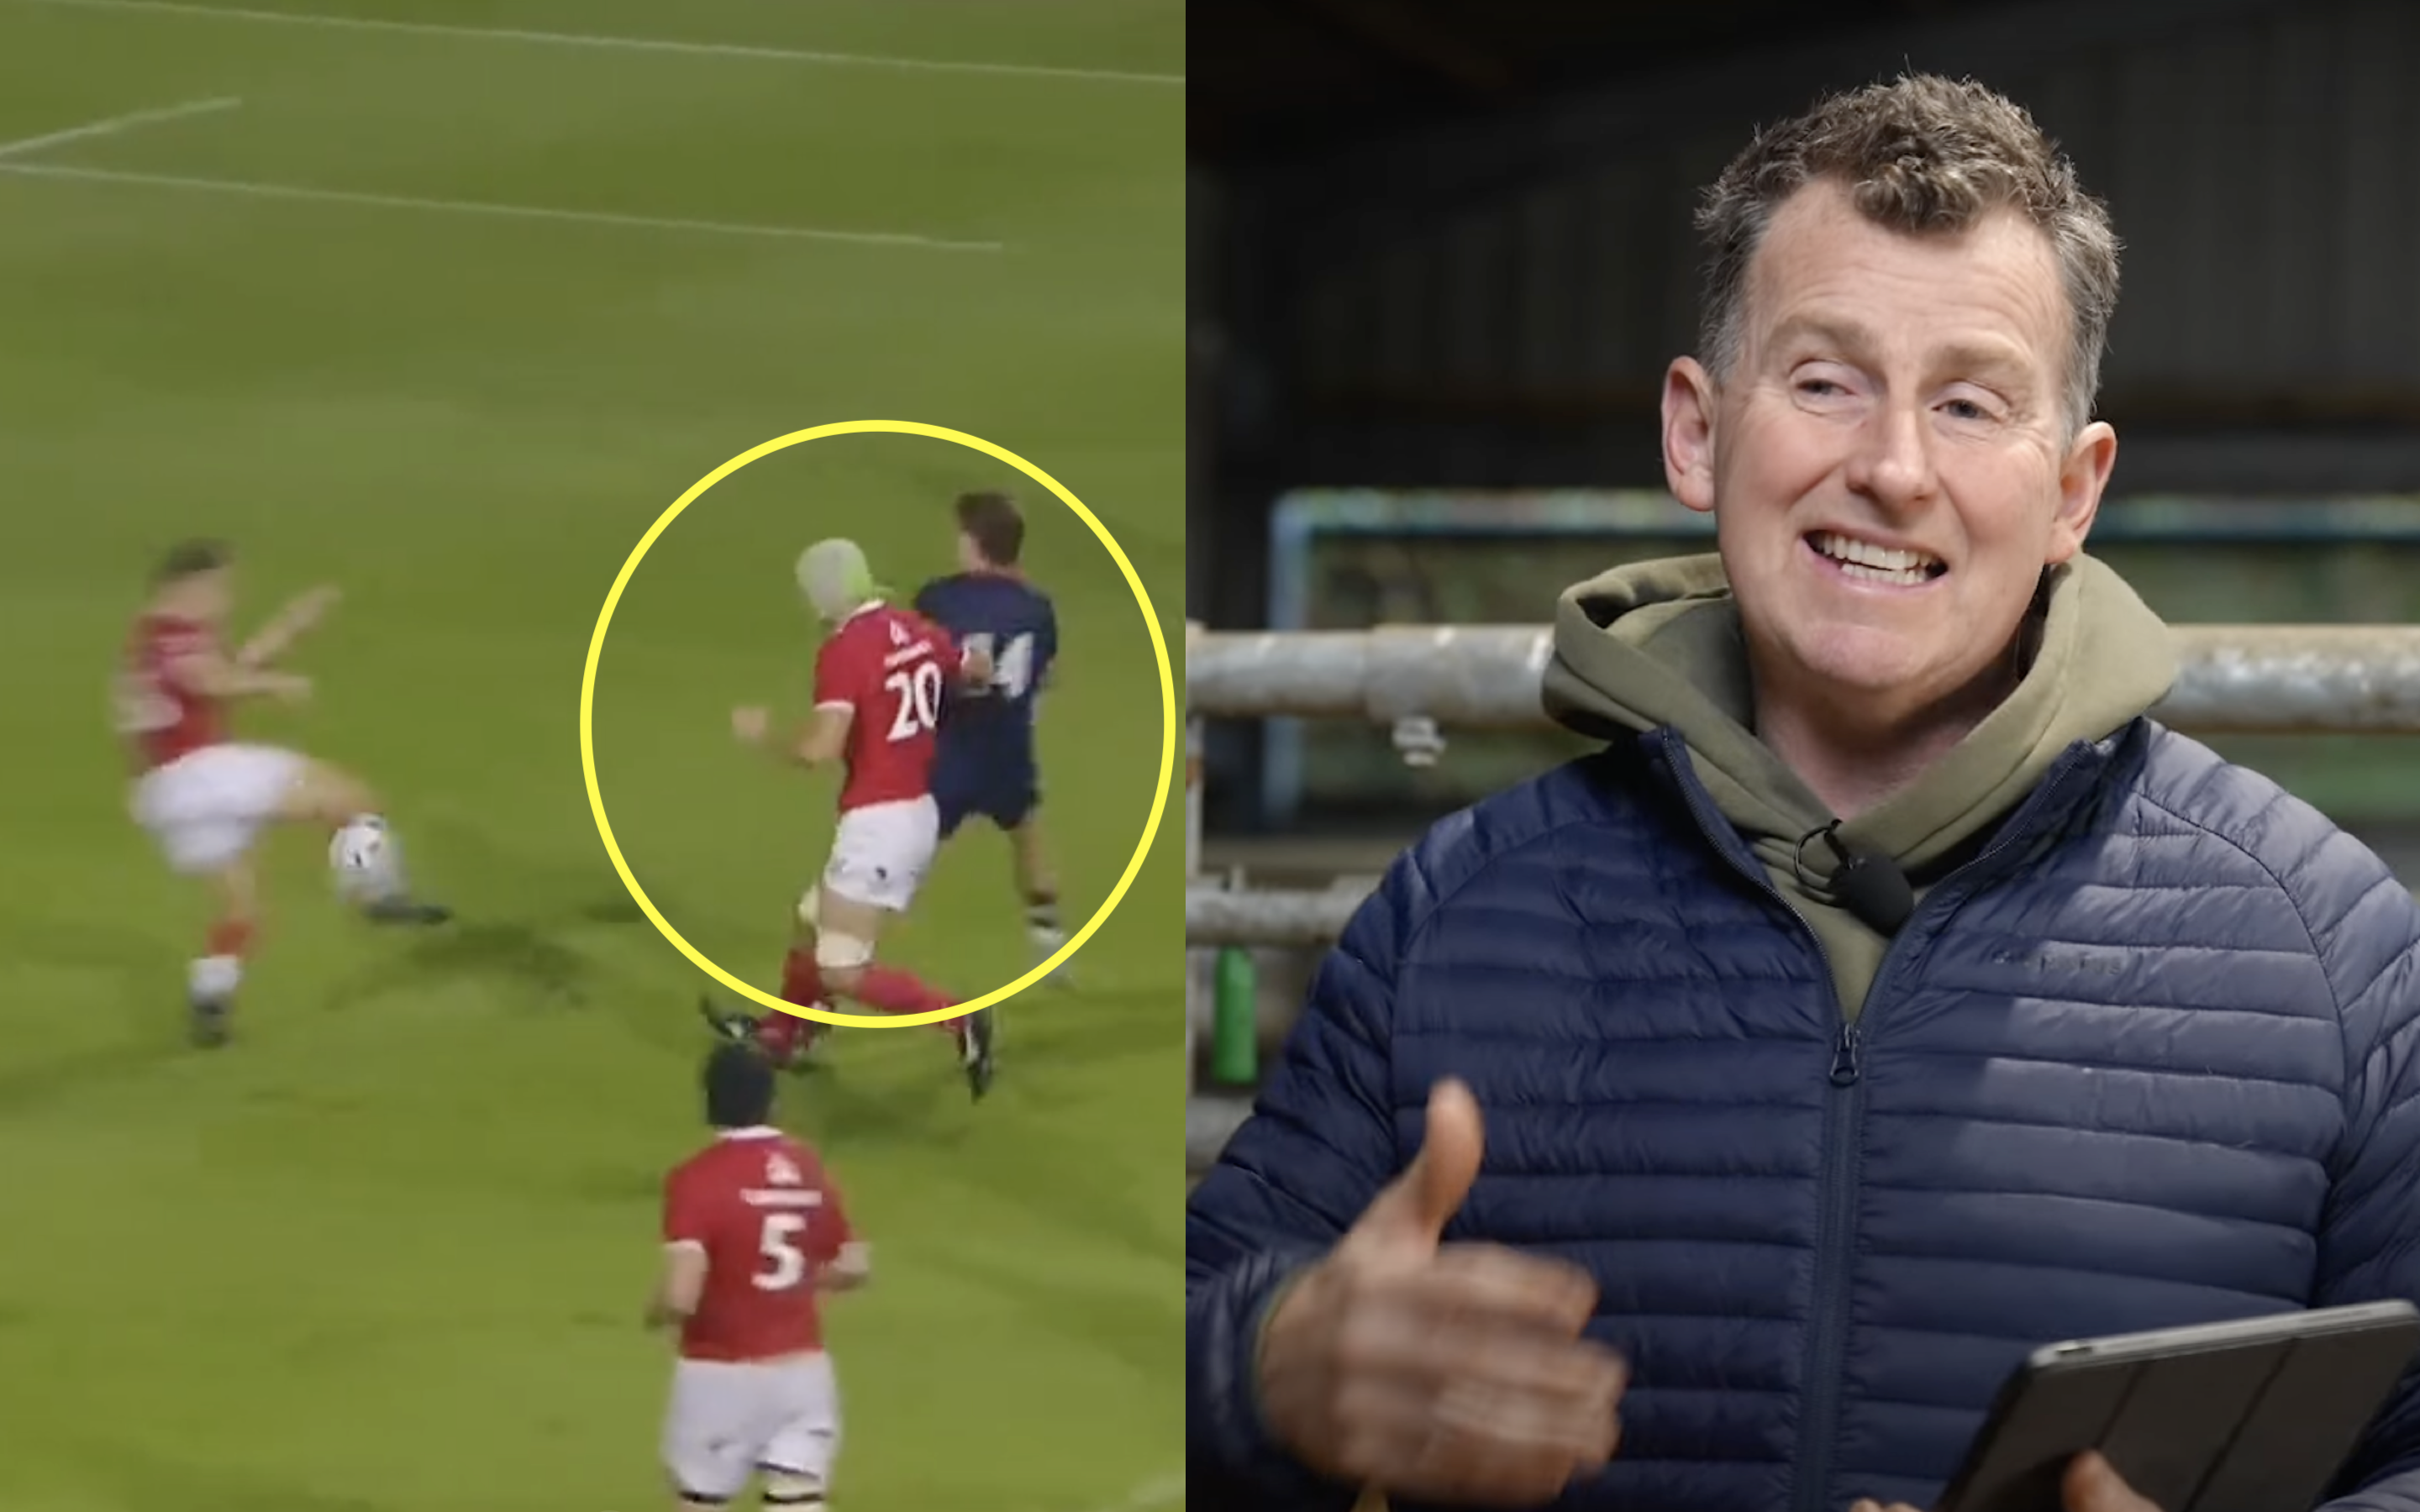 Nigel Owens explains this bizarre moment that confused the rugby world